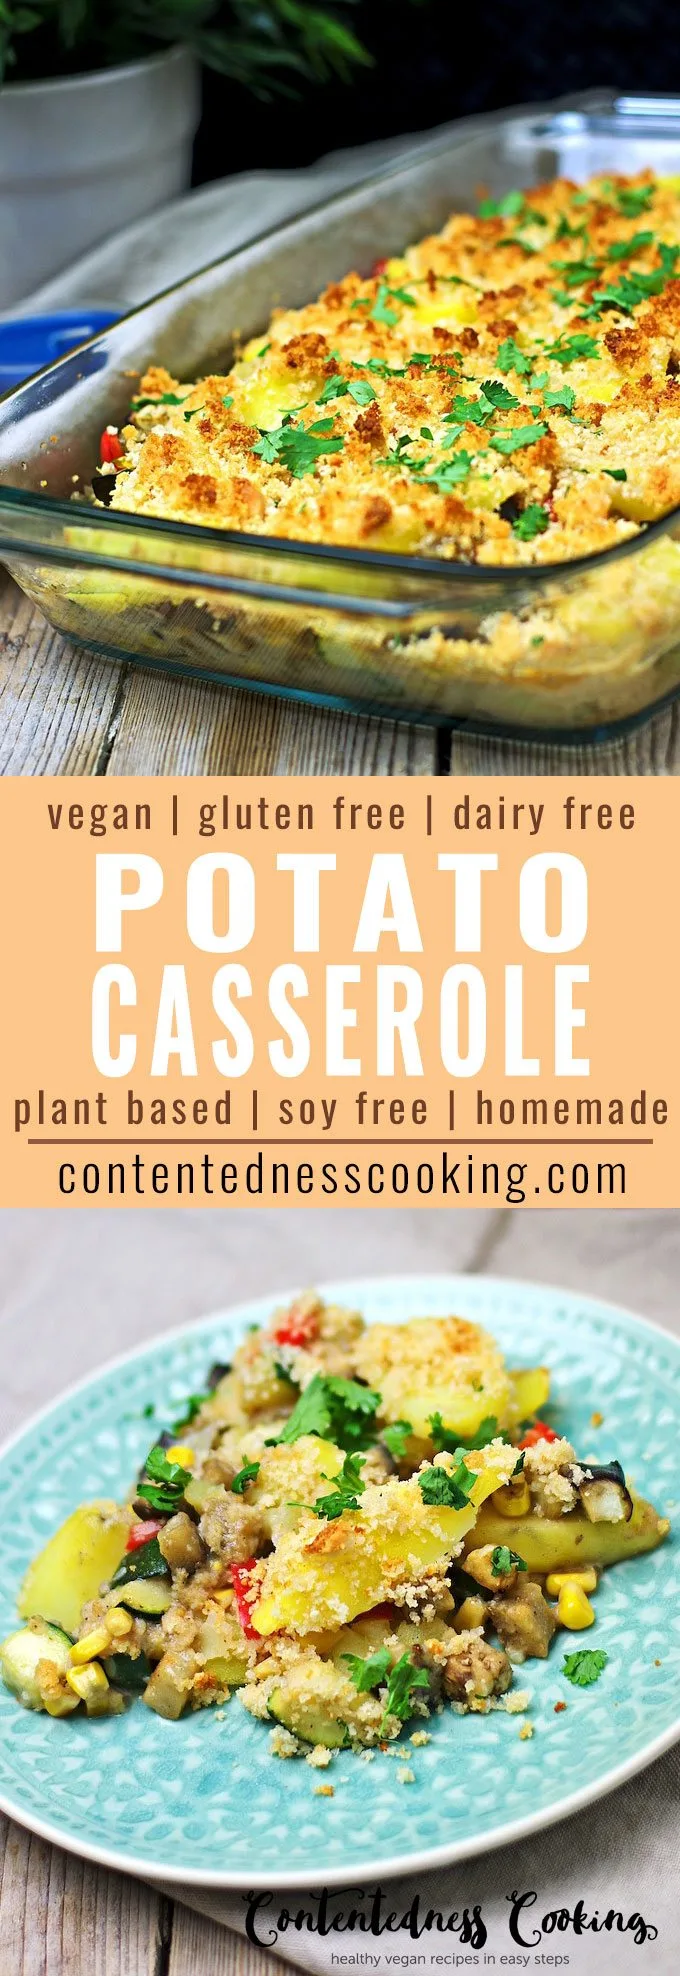 Collage of two pictures of the Vegan Potato Casserole with recipe title text.